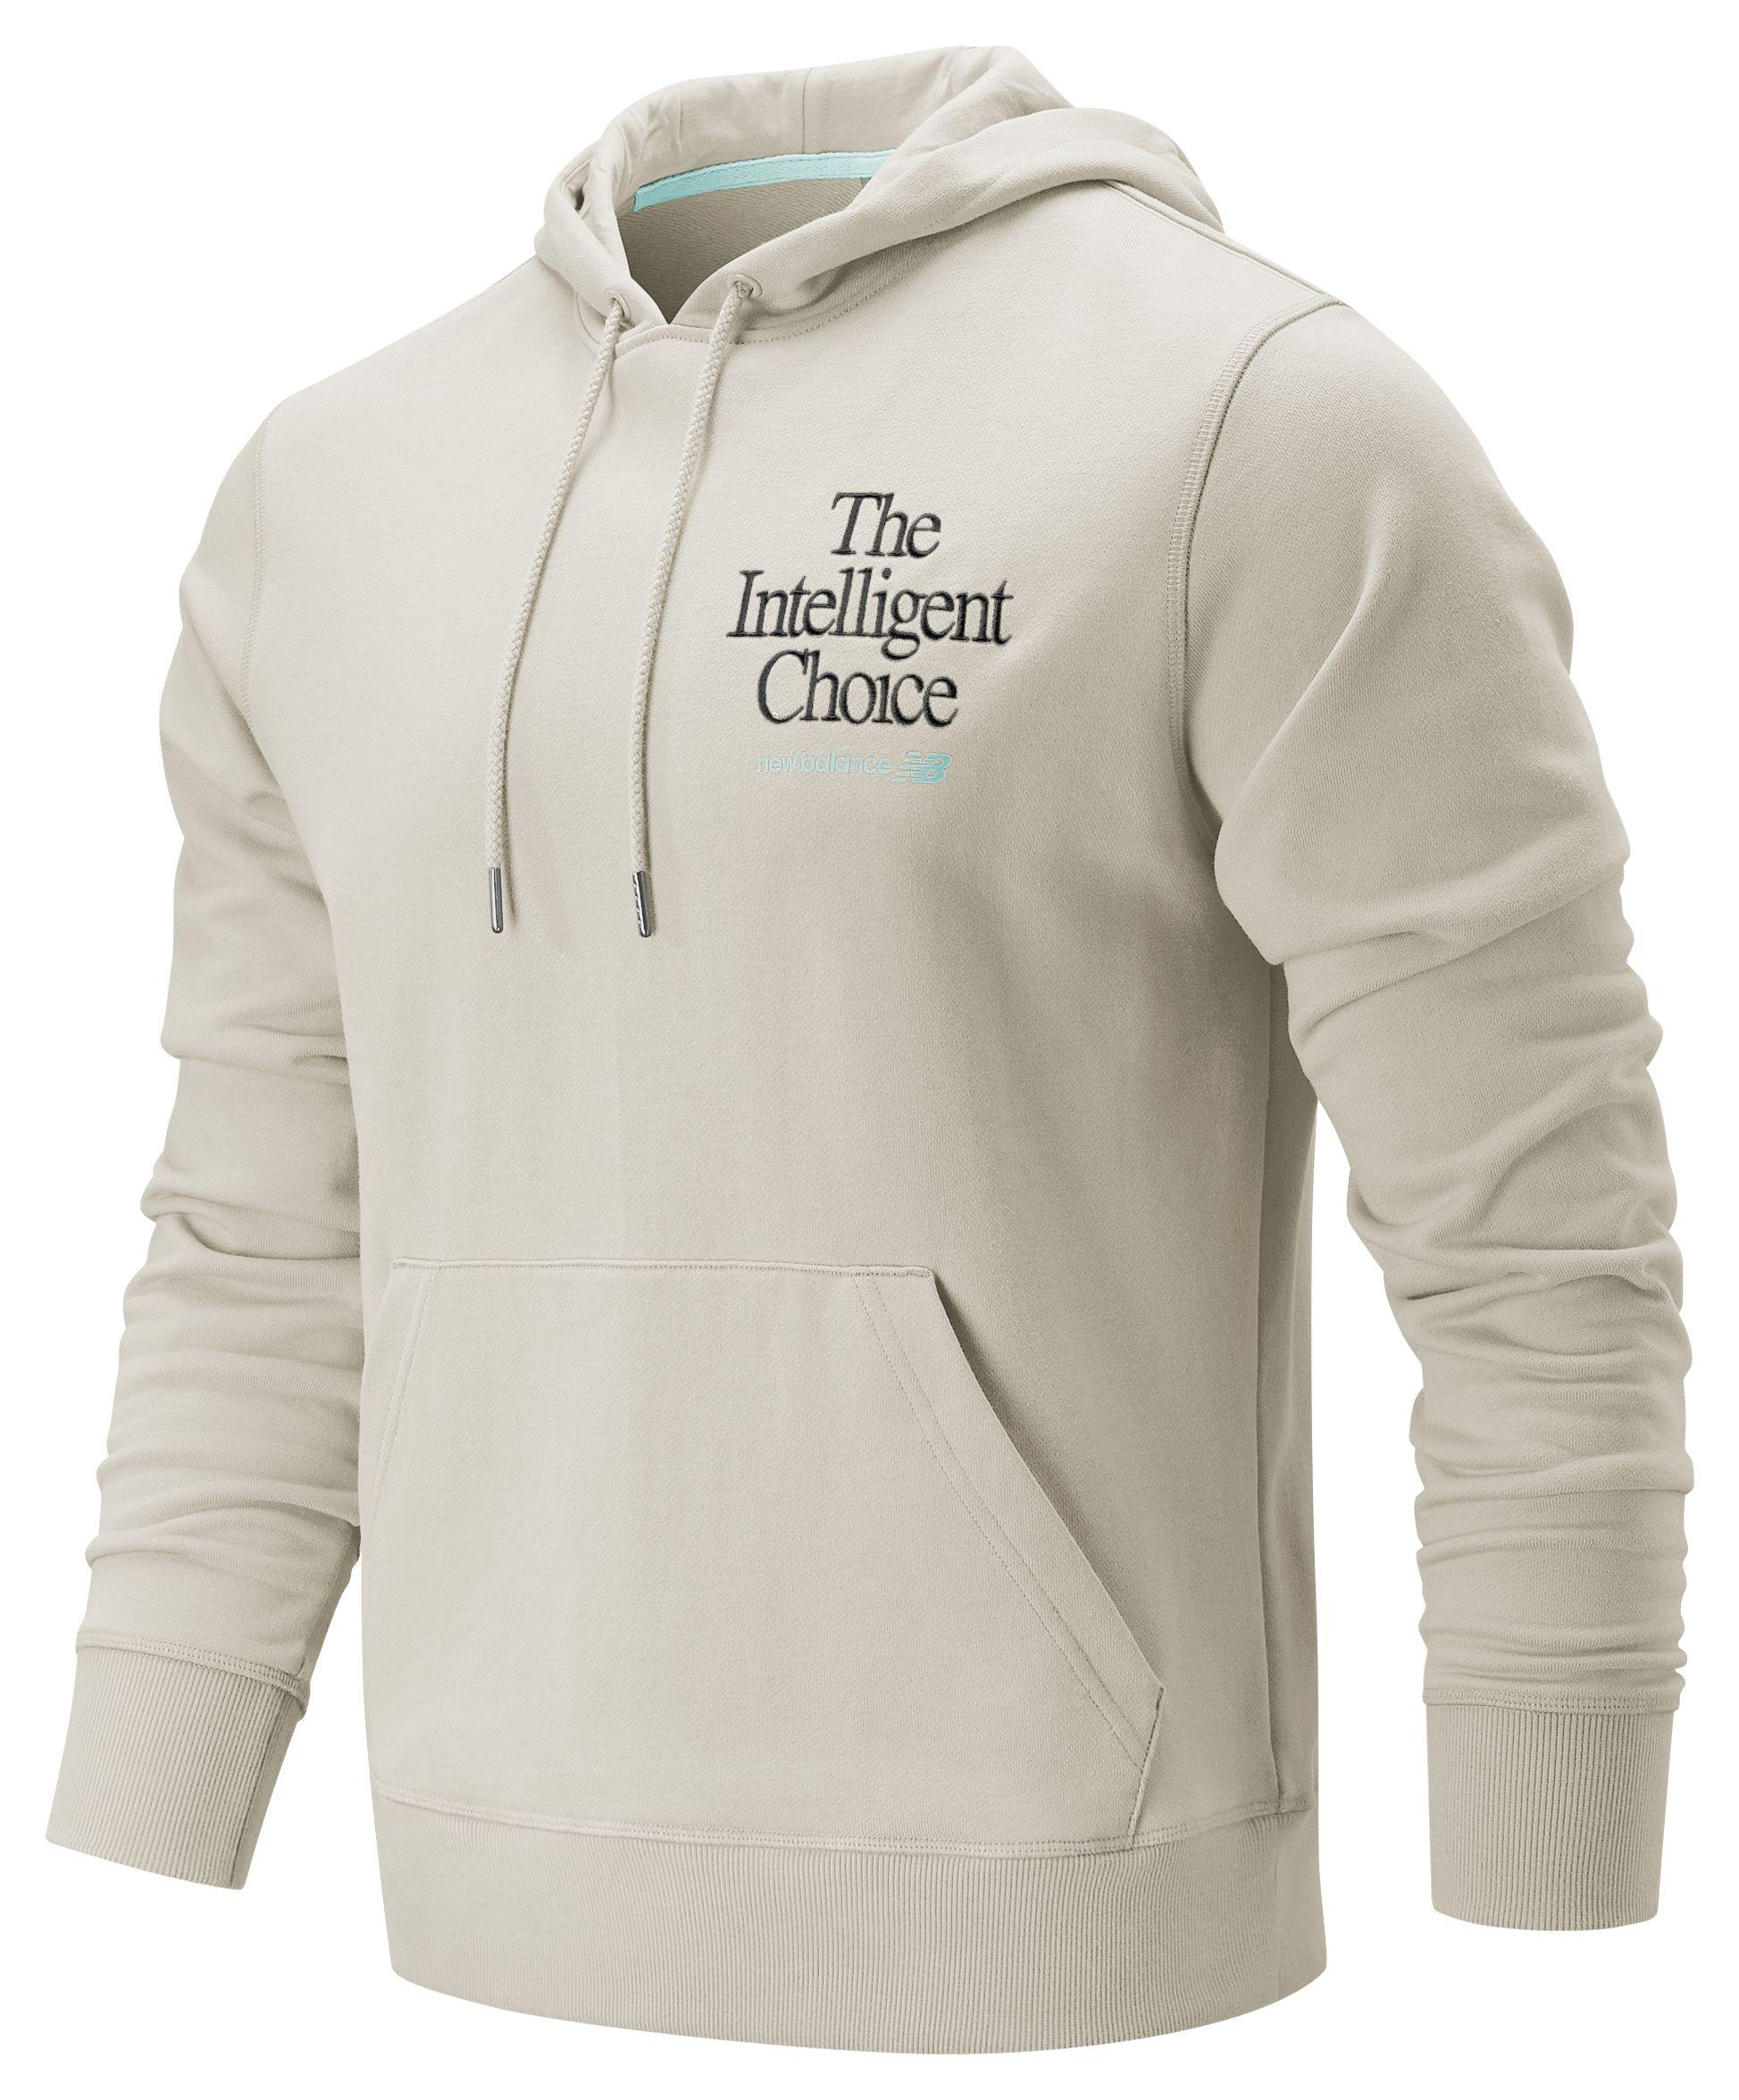 New Balance Intelligent Choice Hoodie in Natural for Men - Lyst